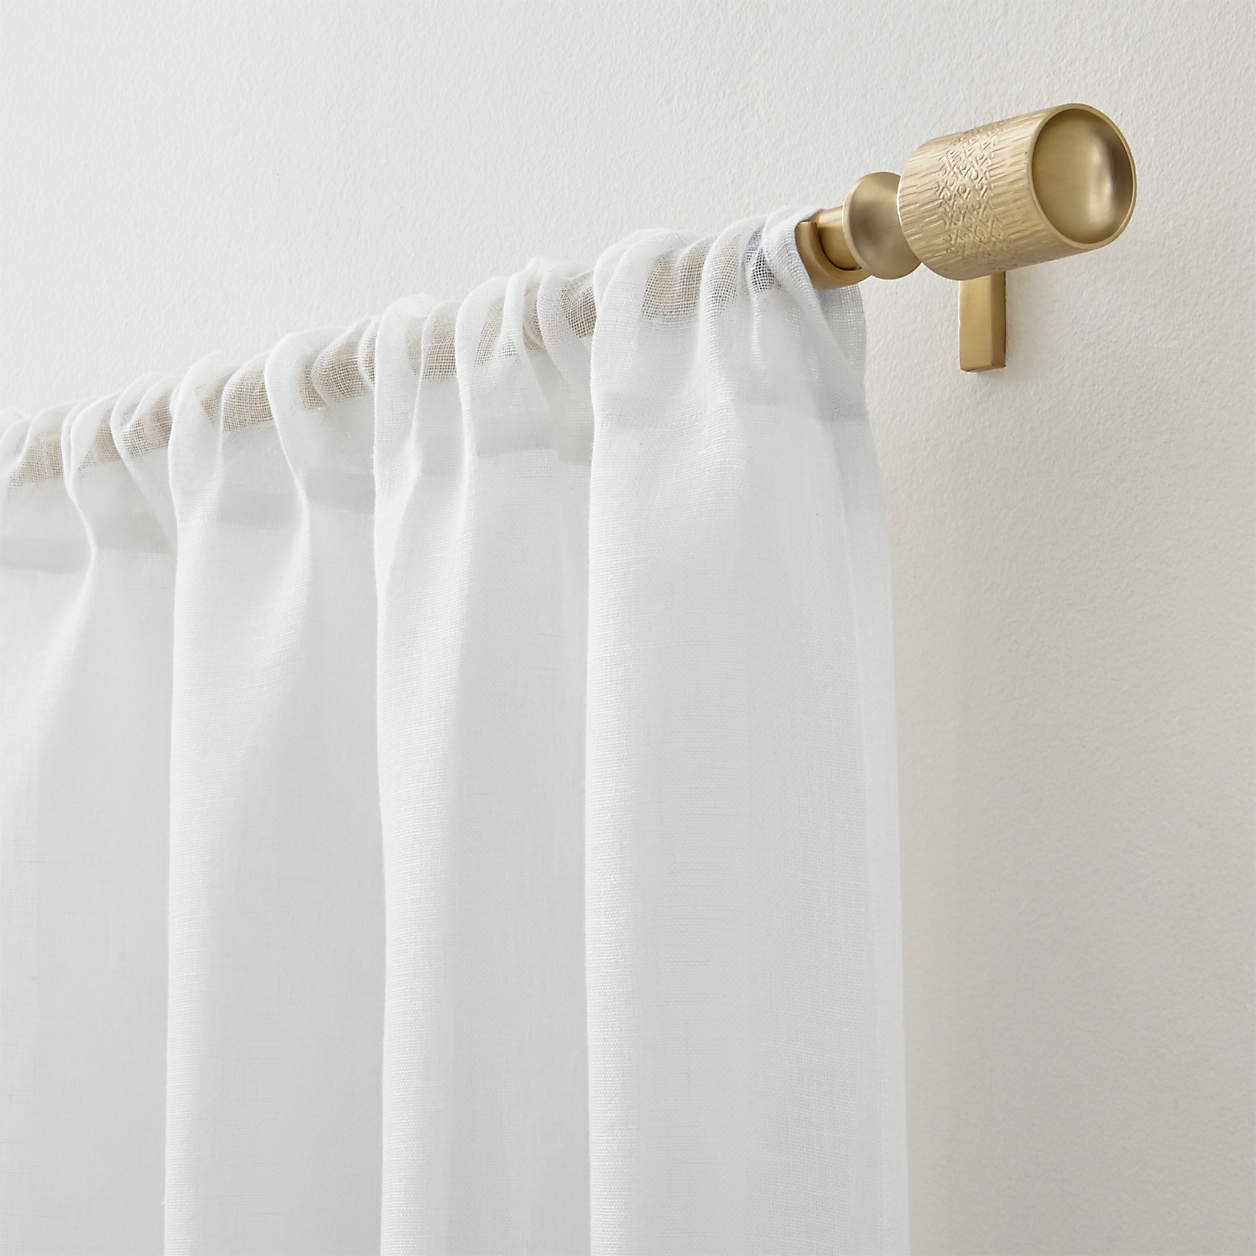 Linen Sheer Curtains, White, 52" x 96" - Image 1